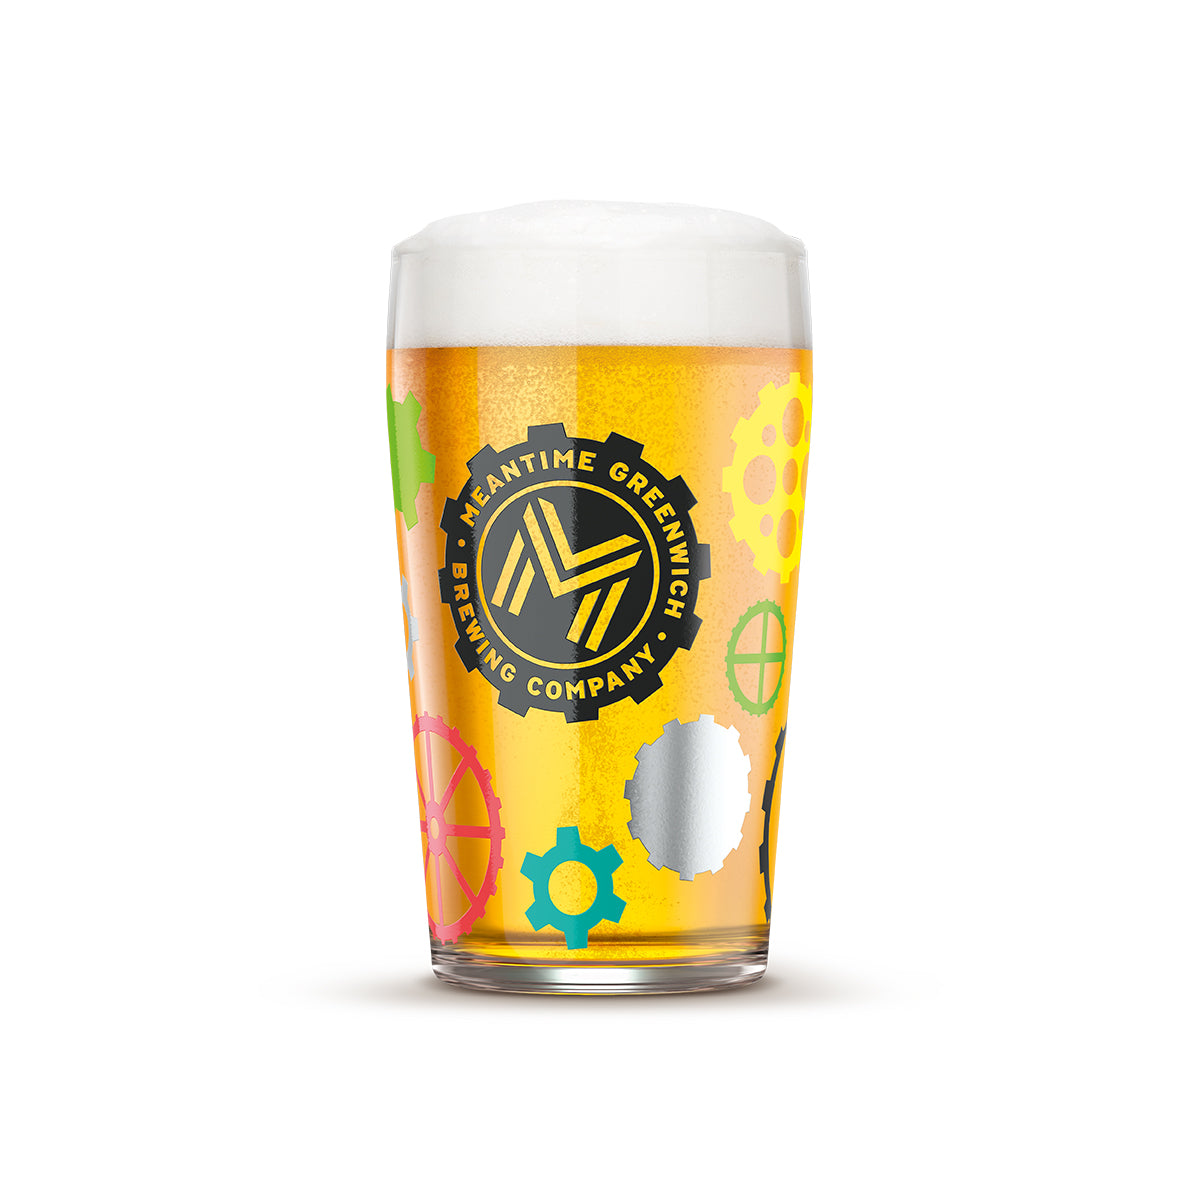 Meantime Greenwich Pint Glass